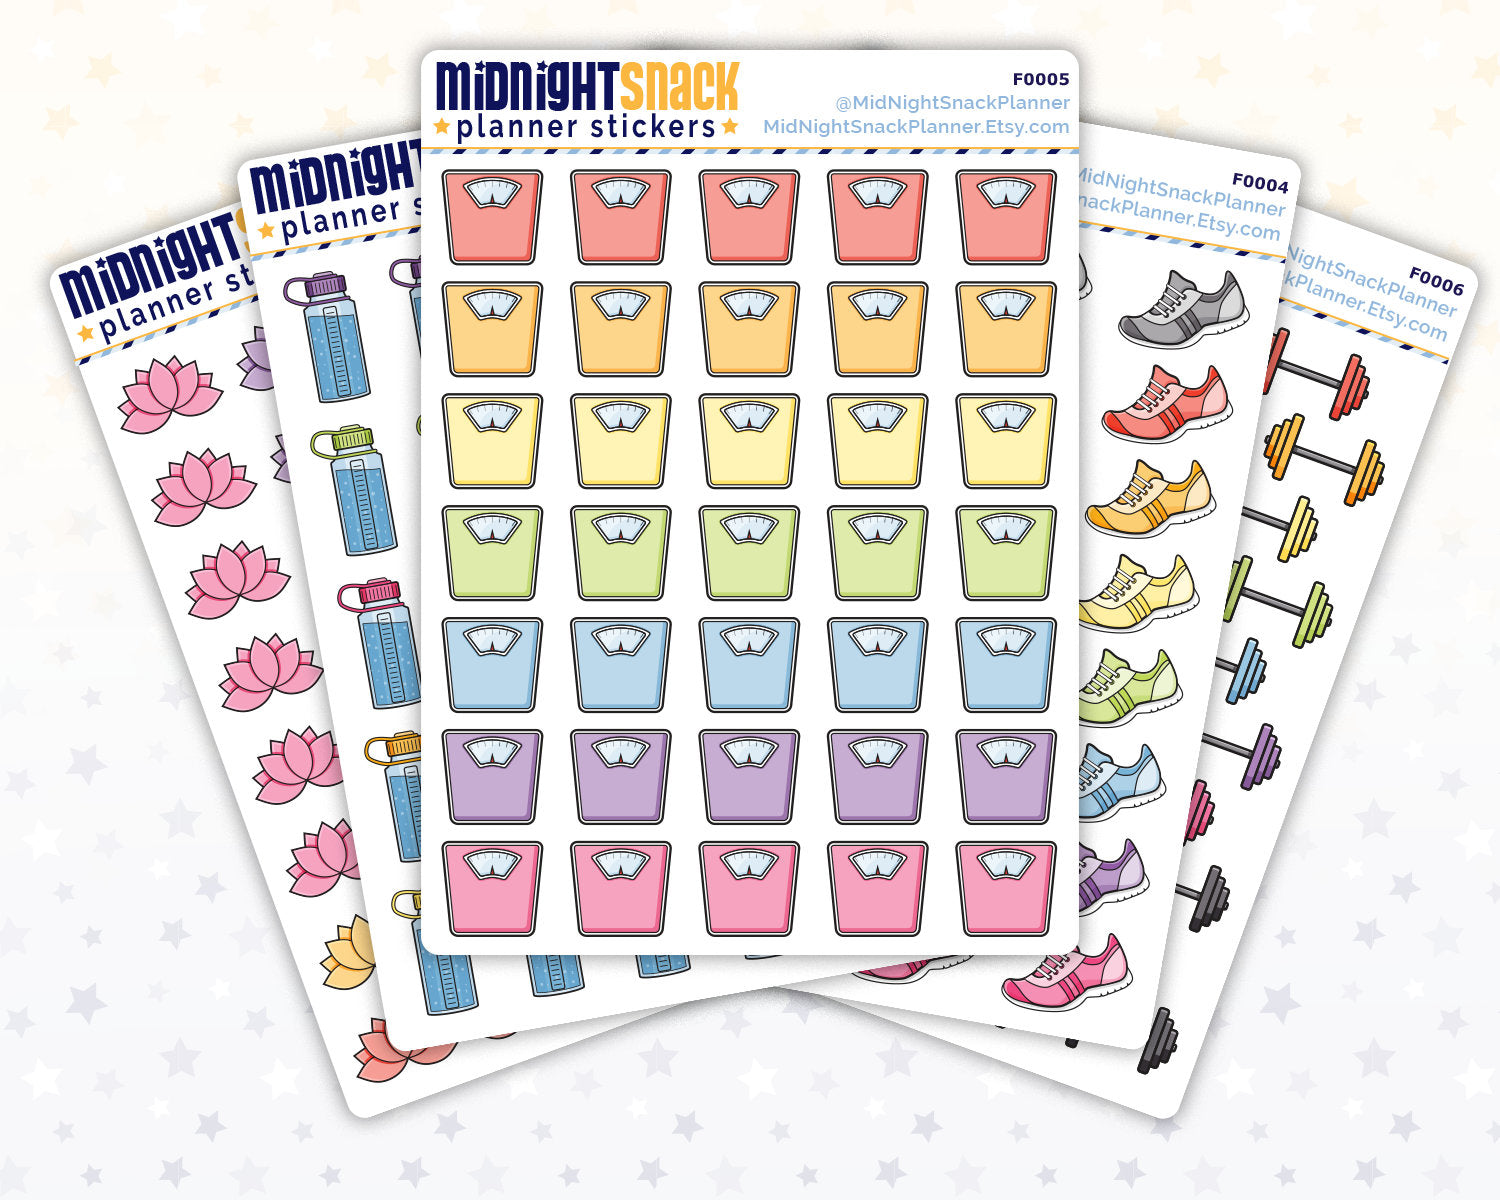 5 Sheet Bundle of Fitness, Exercise or Weight Loss Planner Stickers from Midnight Snack Planner